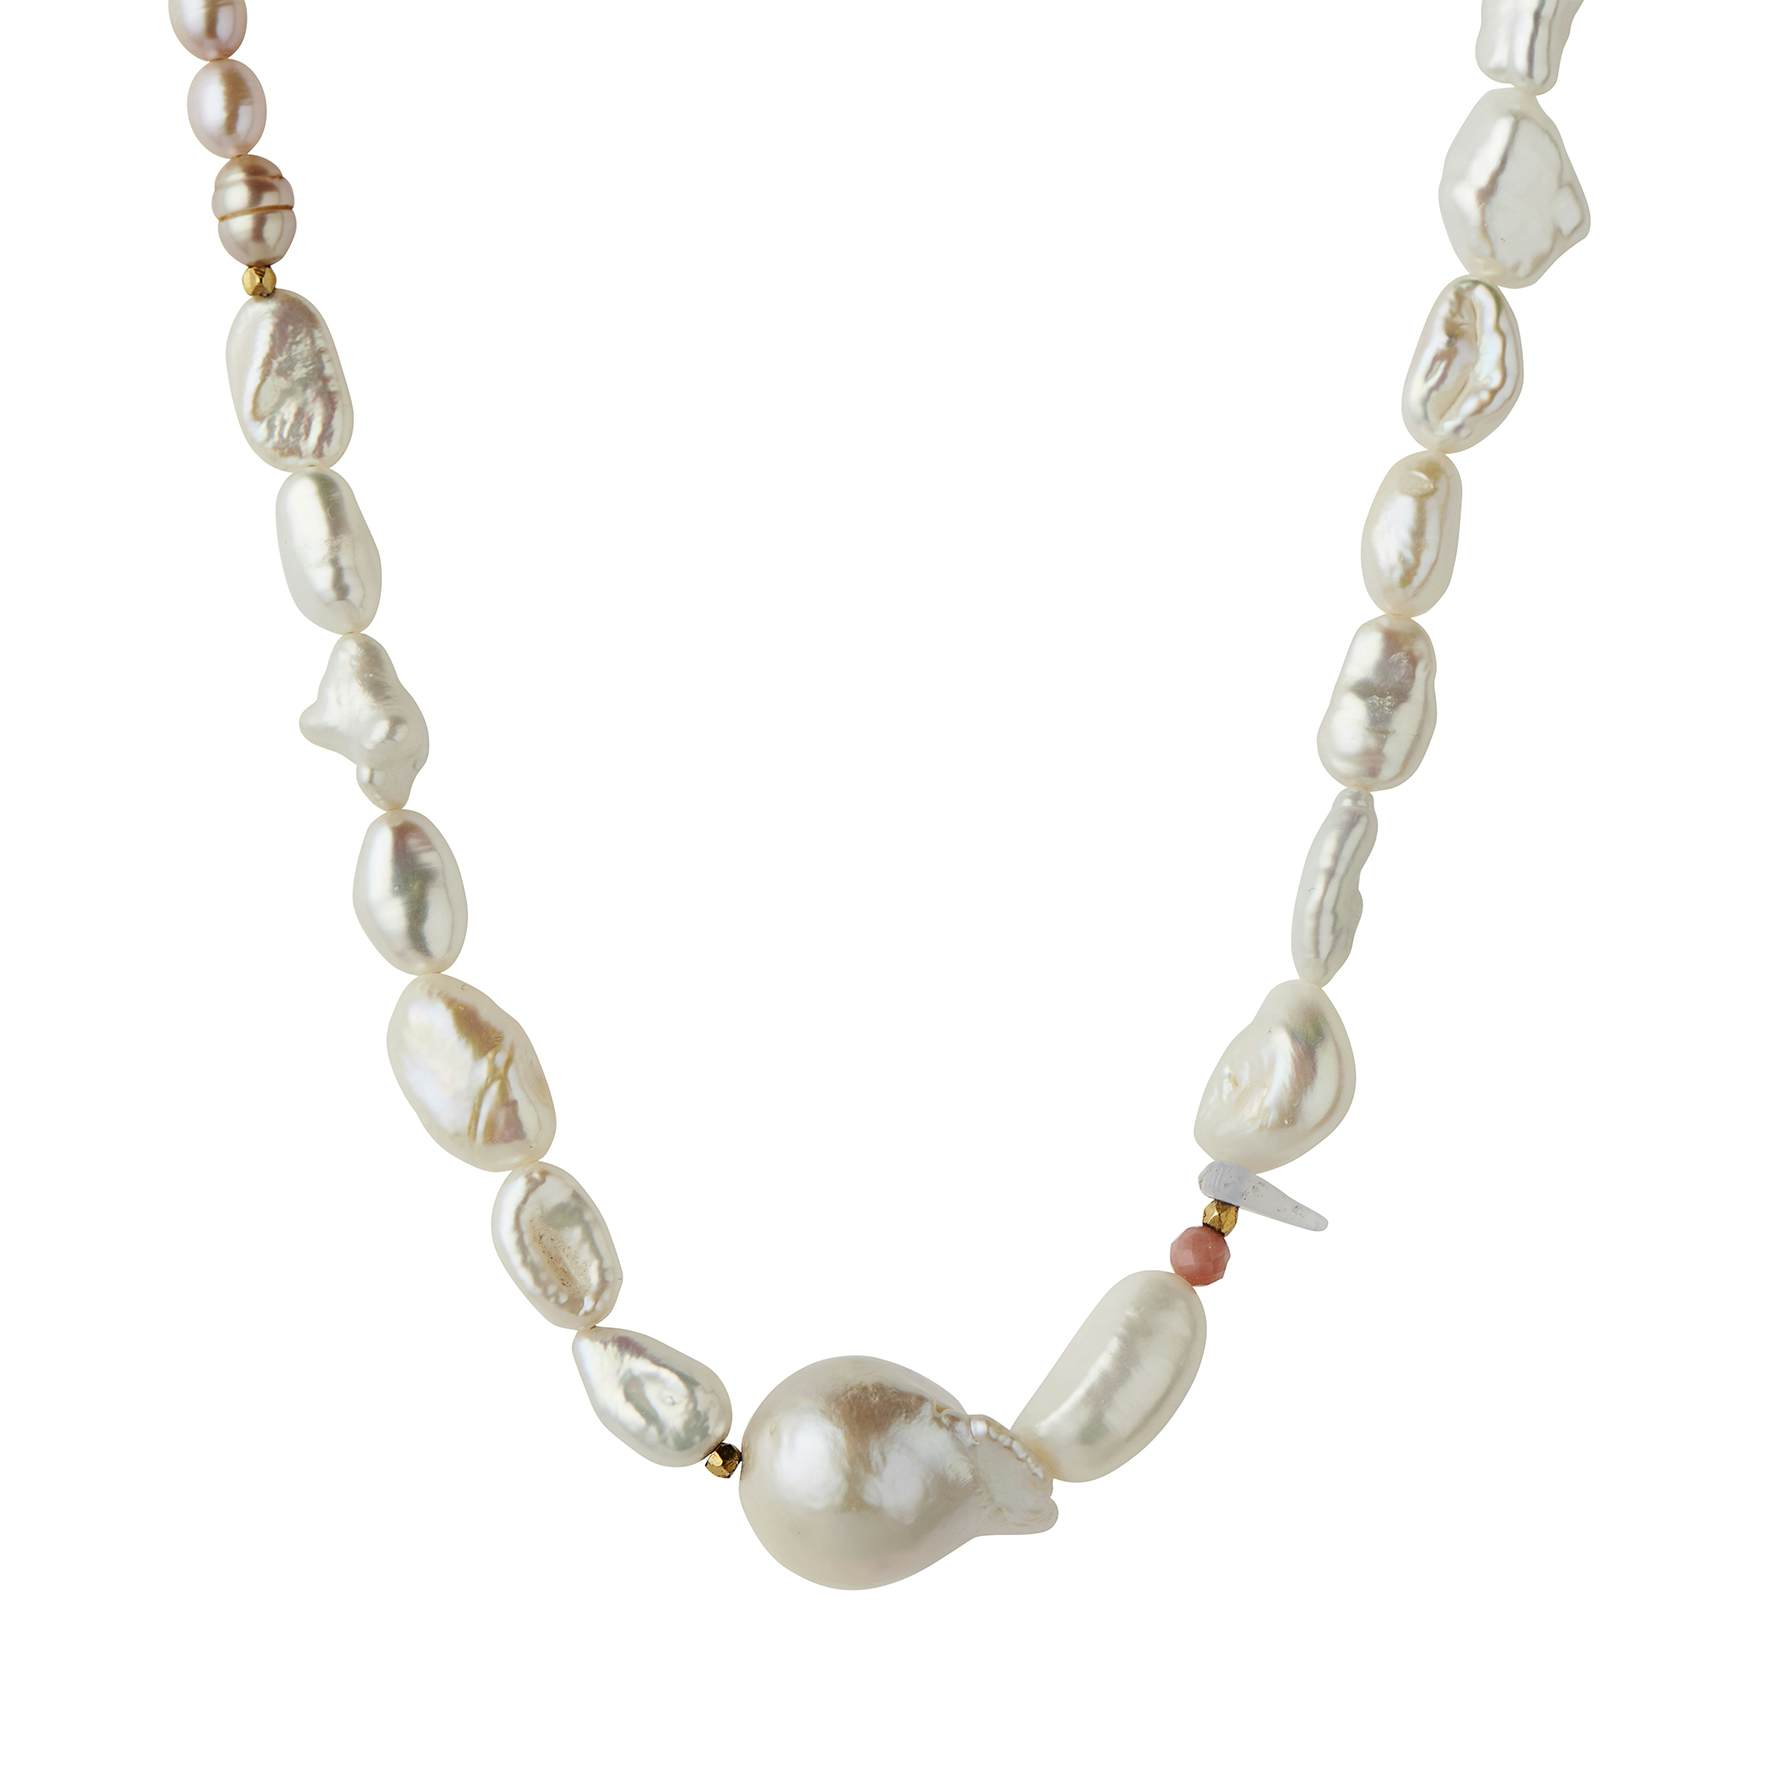 Chunky Glamour Pearl Necklace - White & Rose from STINE A Jewelry in Goldplated-Silver Sterling 925